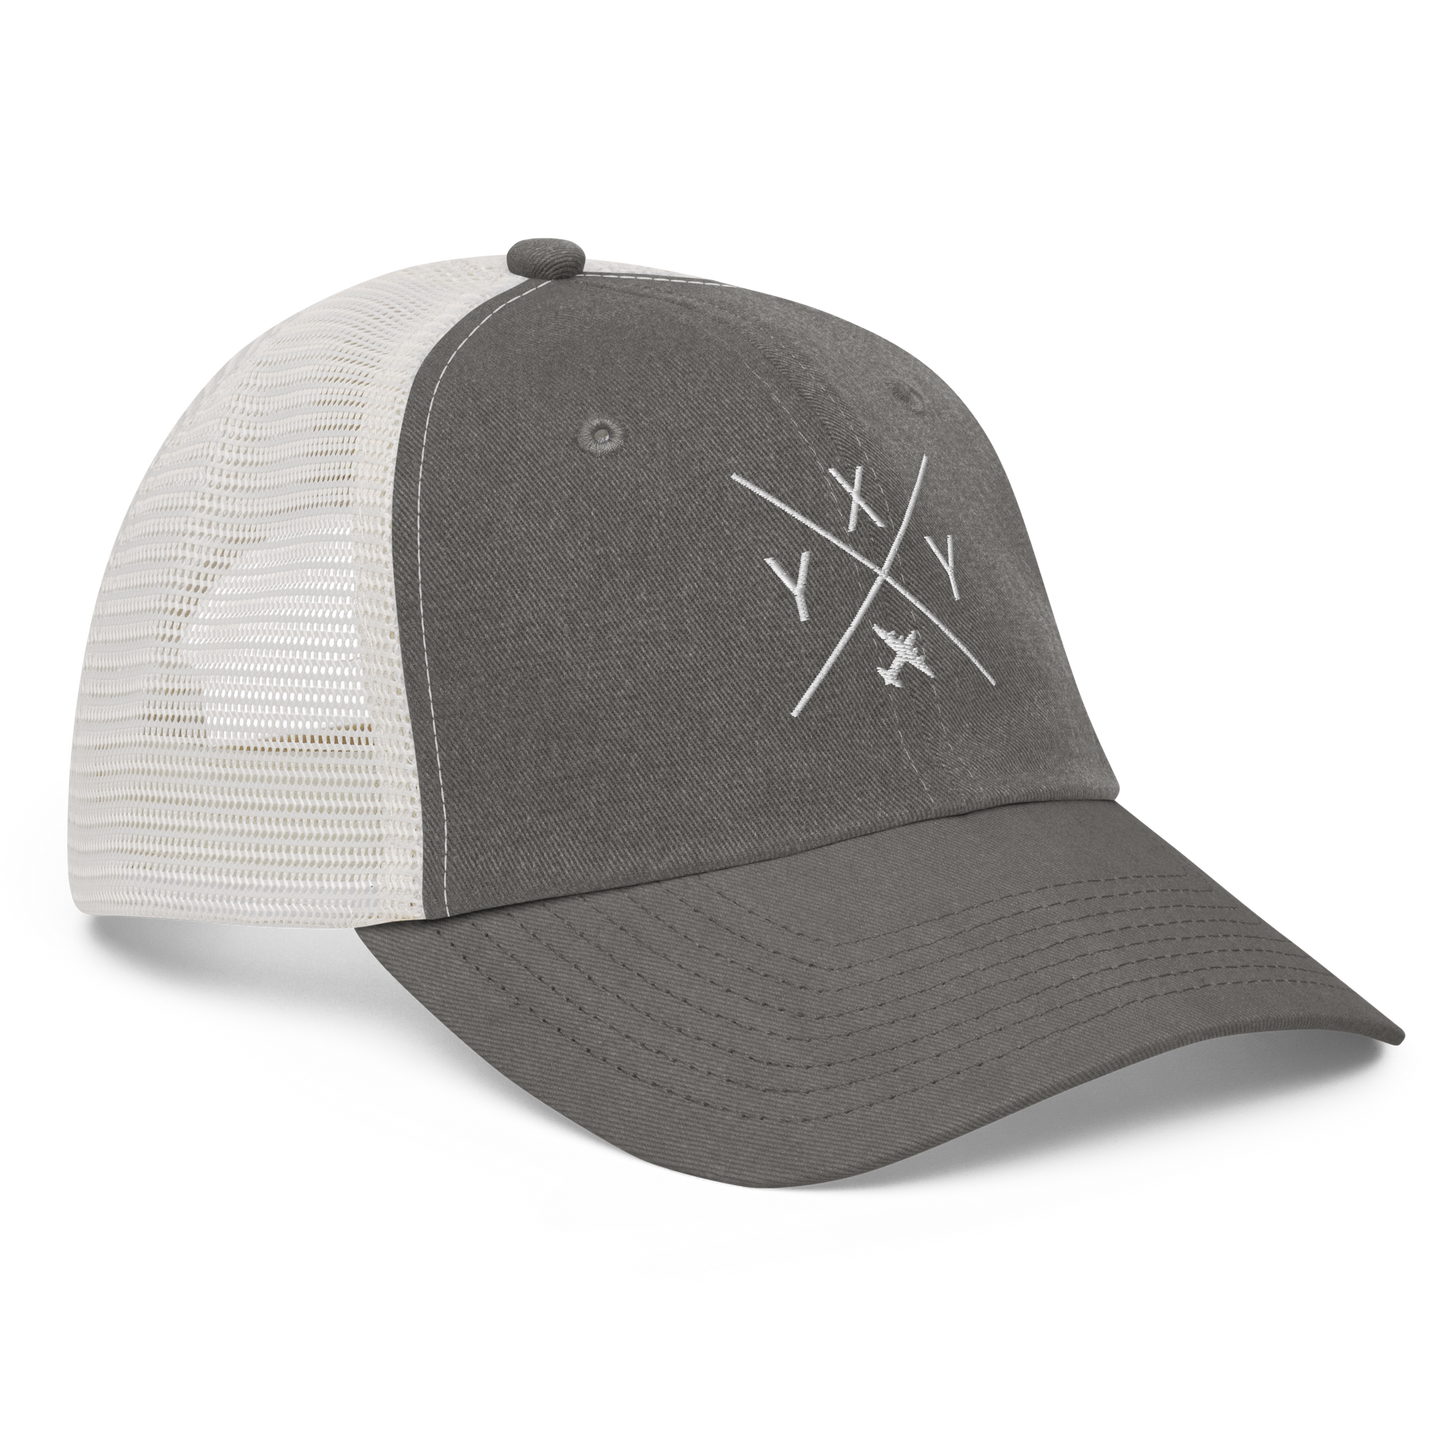 Crossed-X Pigment-Dyed Trucker Cap • YXY Whitehorse • YHM Designs - Image 10